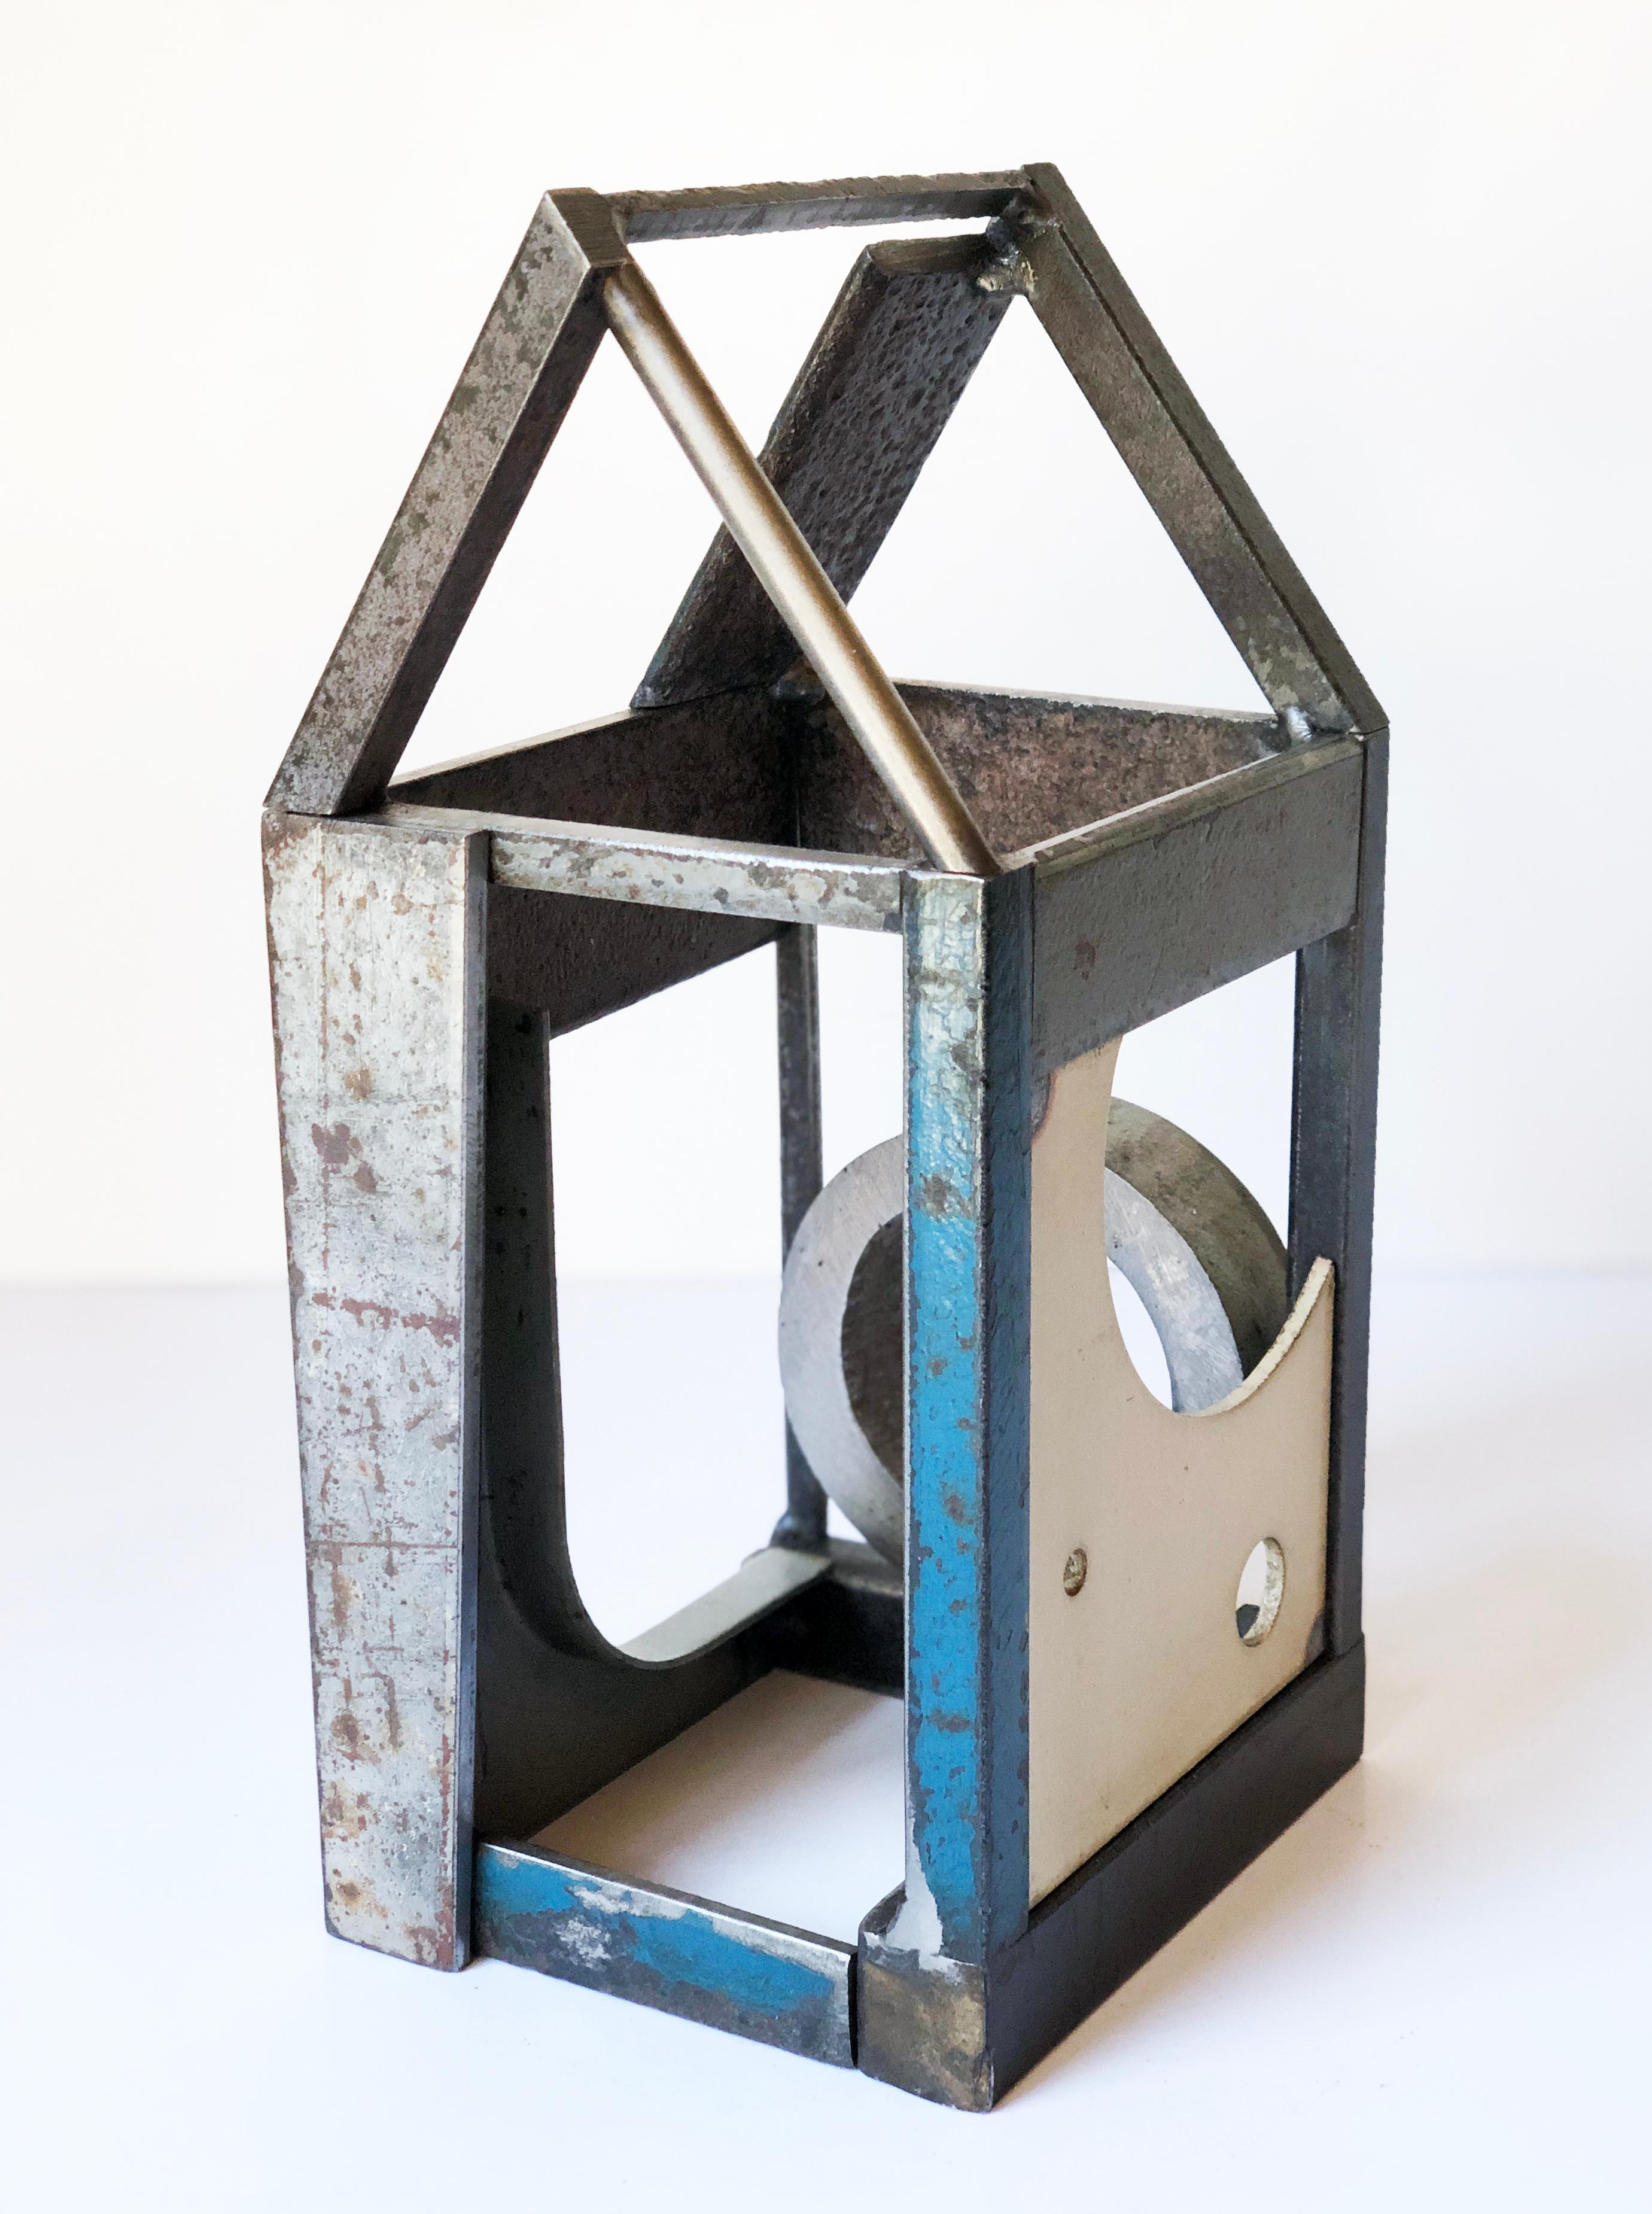 Folk Art Jim Rose Barn House Structure, Welded Steel Sculpture Made with Salvaged Steel